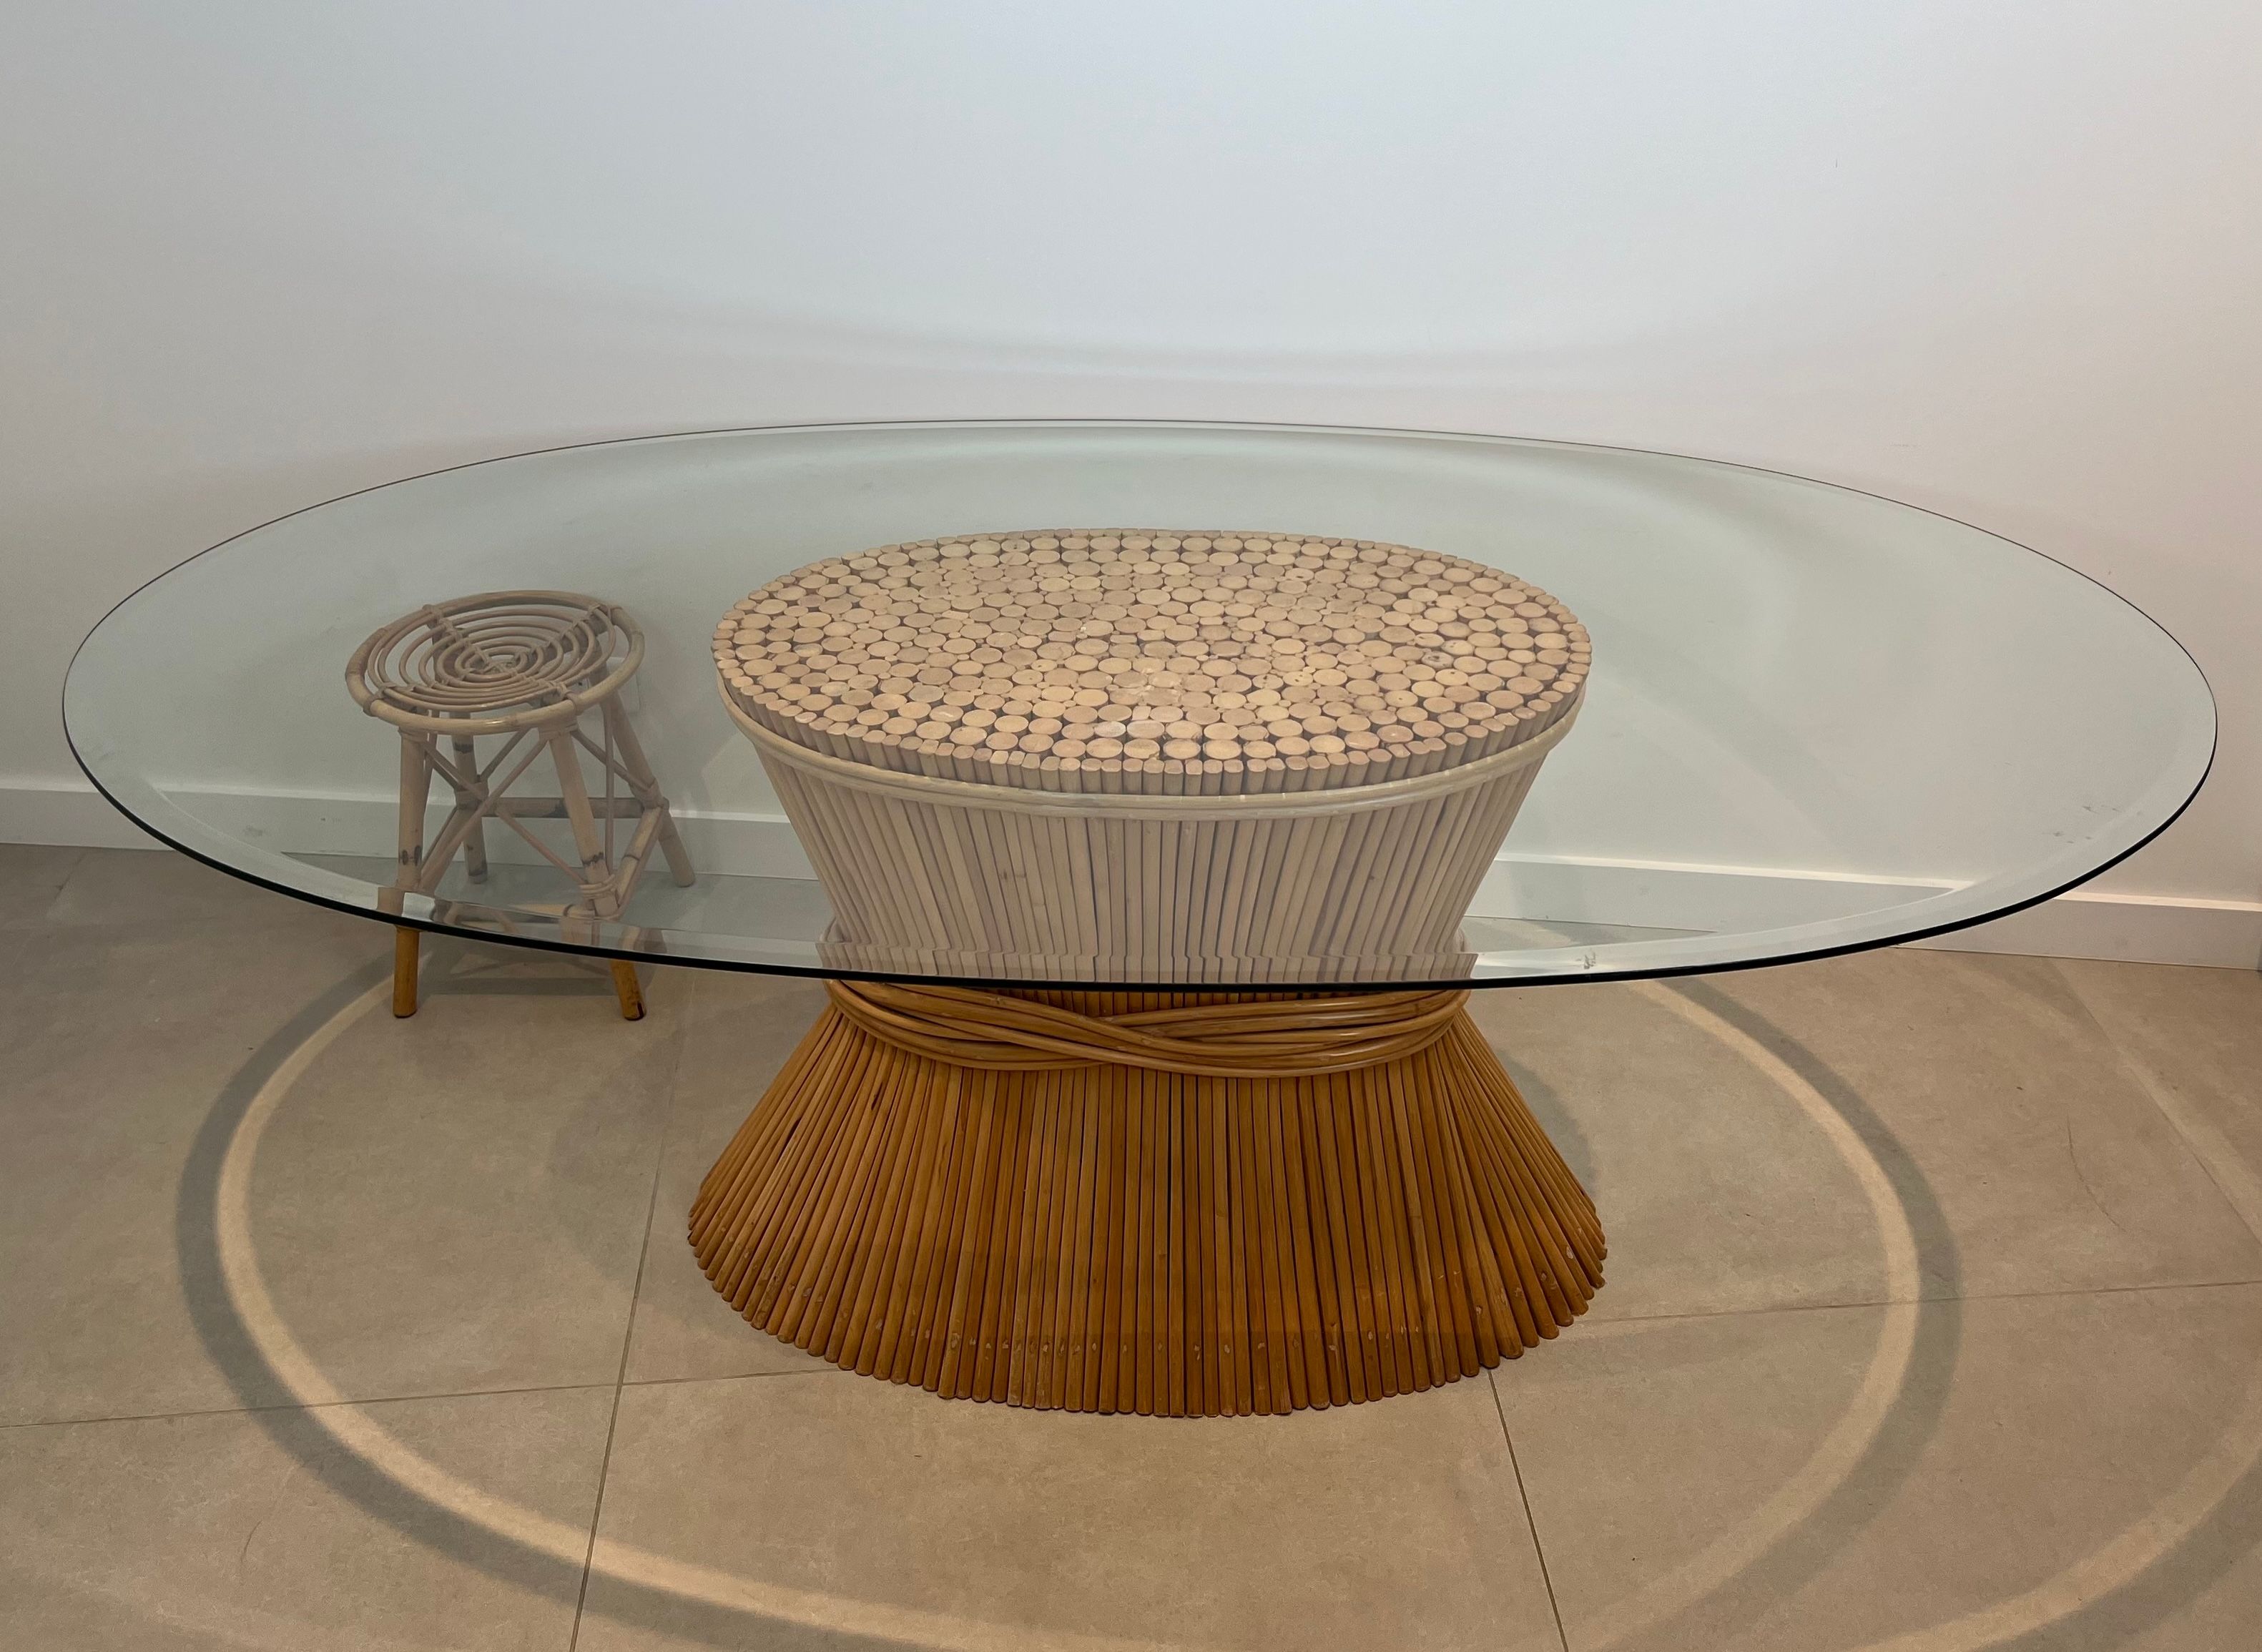 Large Wheat Sheaf Dinning Table with an Oval Beveled Glass Top on a Bamboo Base by American Designer Elinor Mc Guire